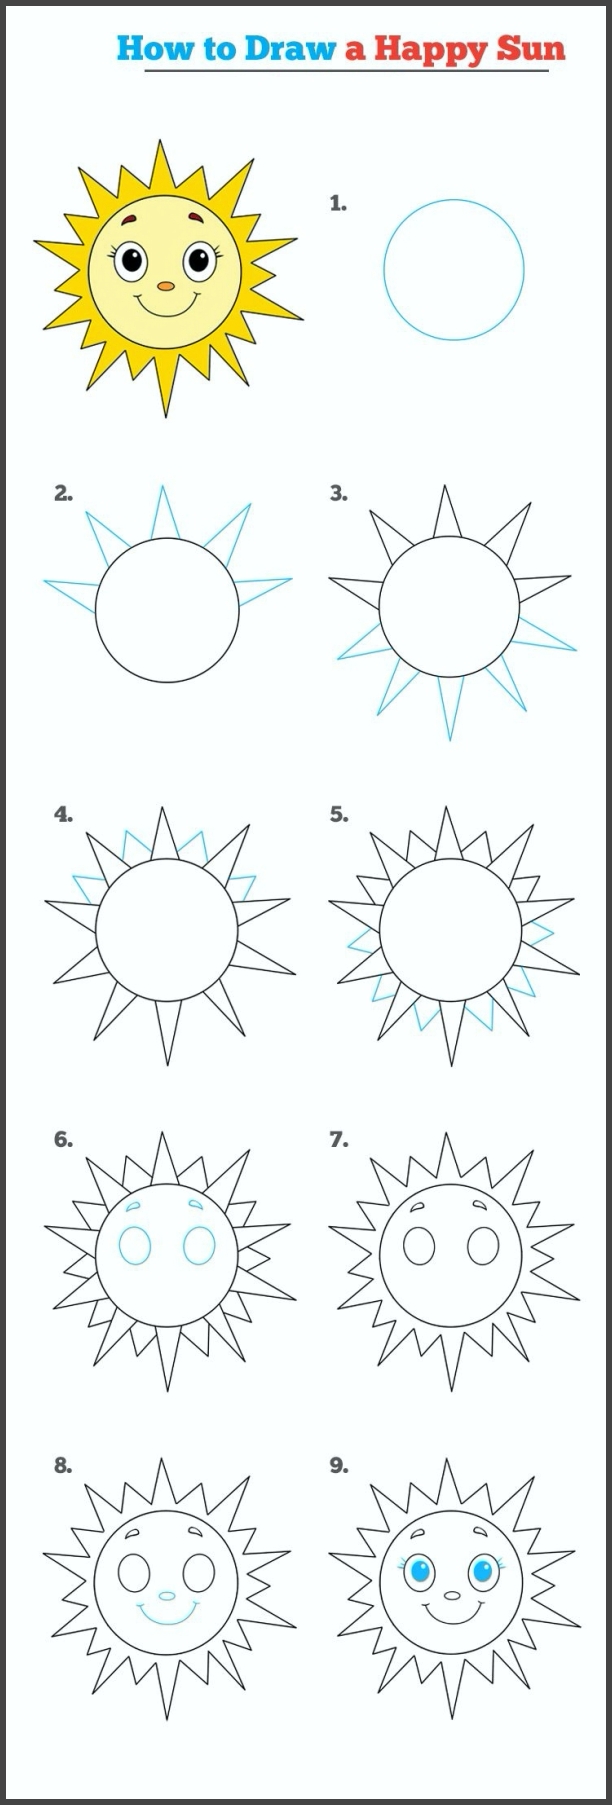 cool-and-easy-things-to-draw-when-bored/How to draw a sun in 2022